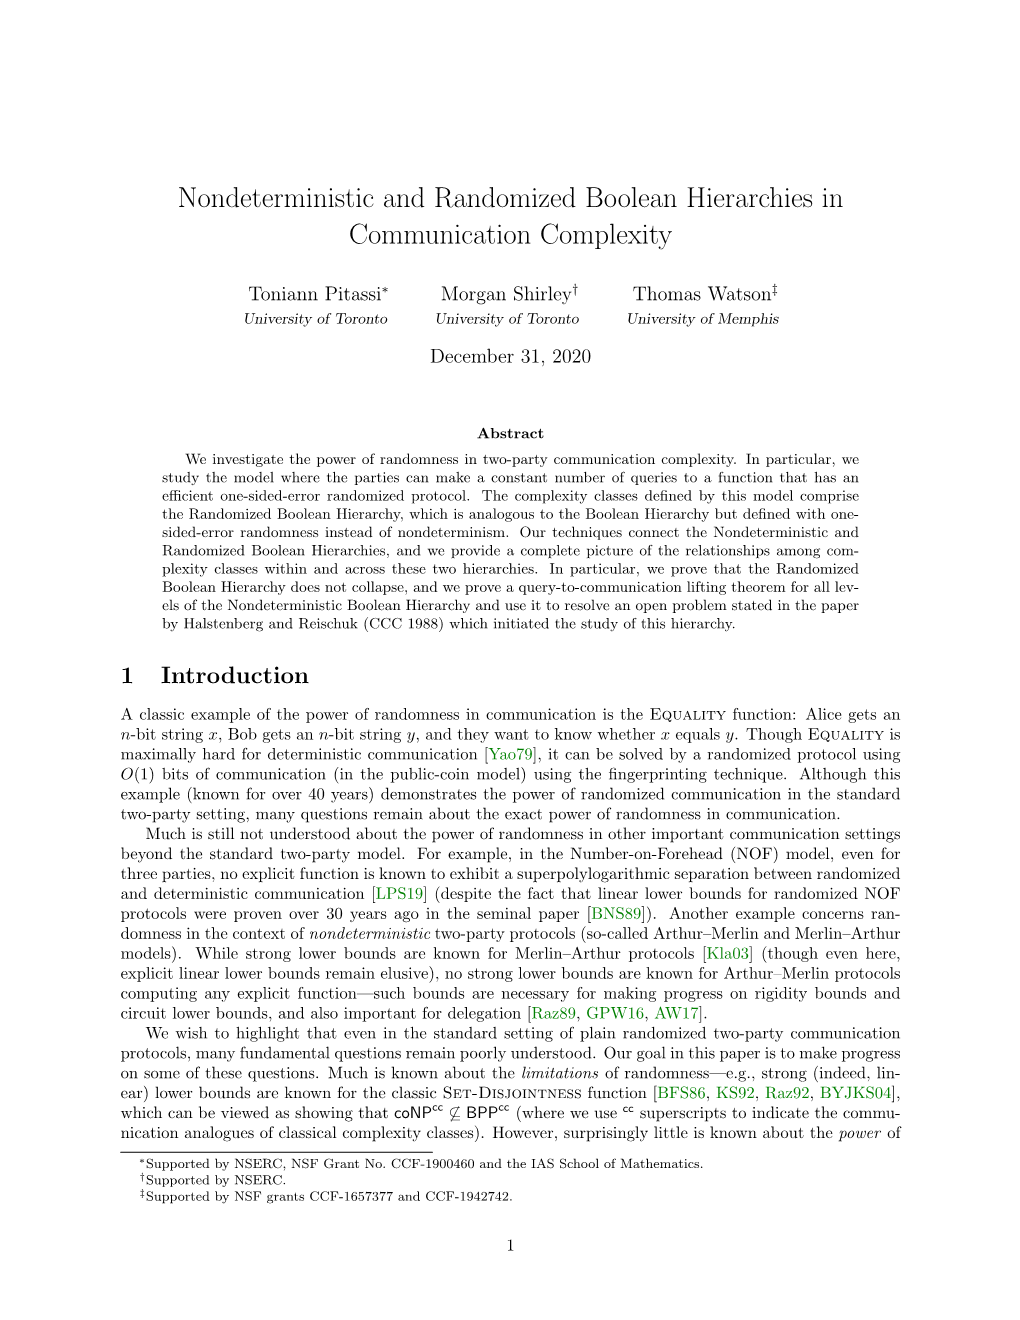 Nondeterministic and Randomized Boolean Hierarchies in Communication Complexity